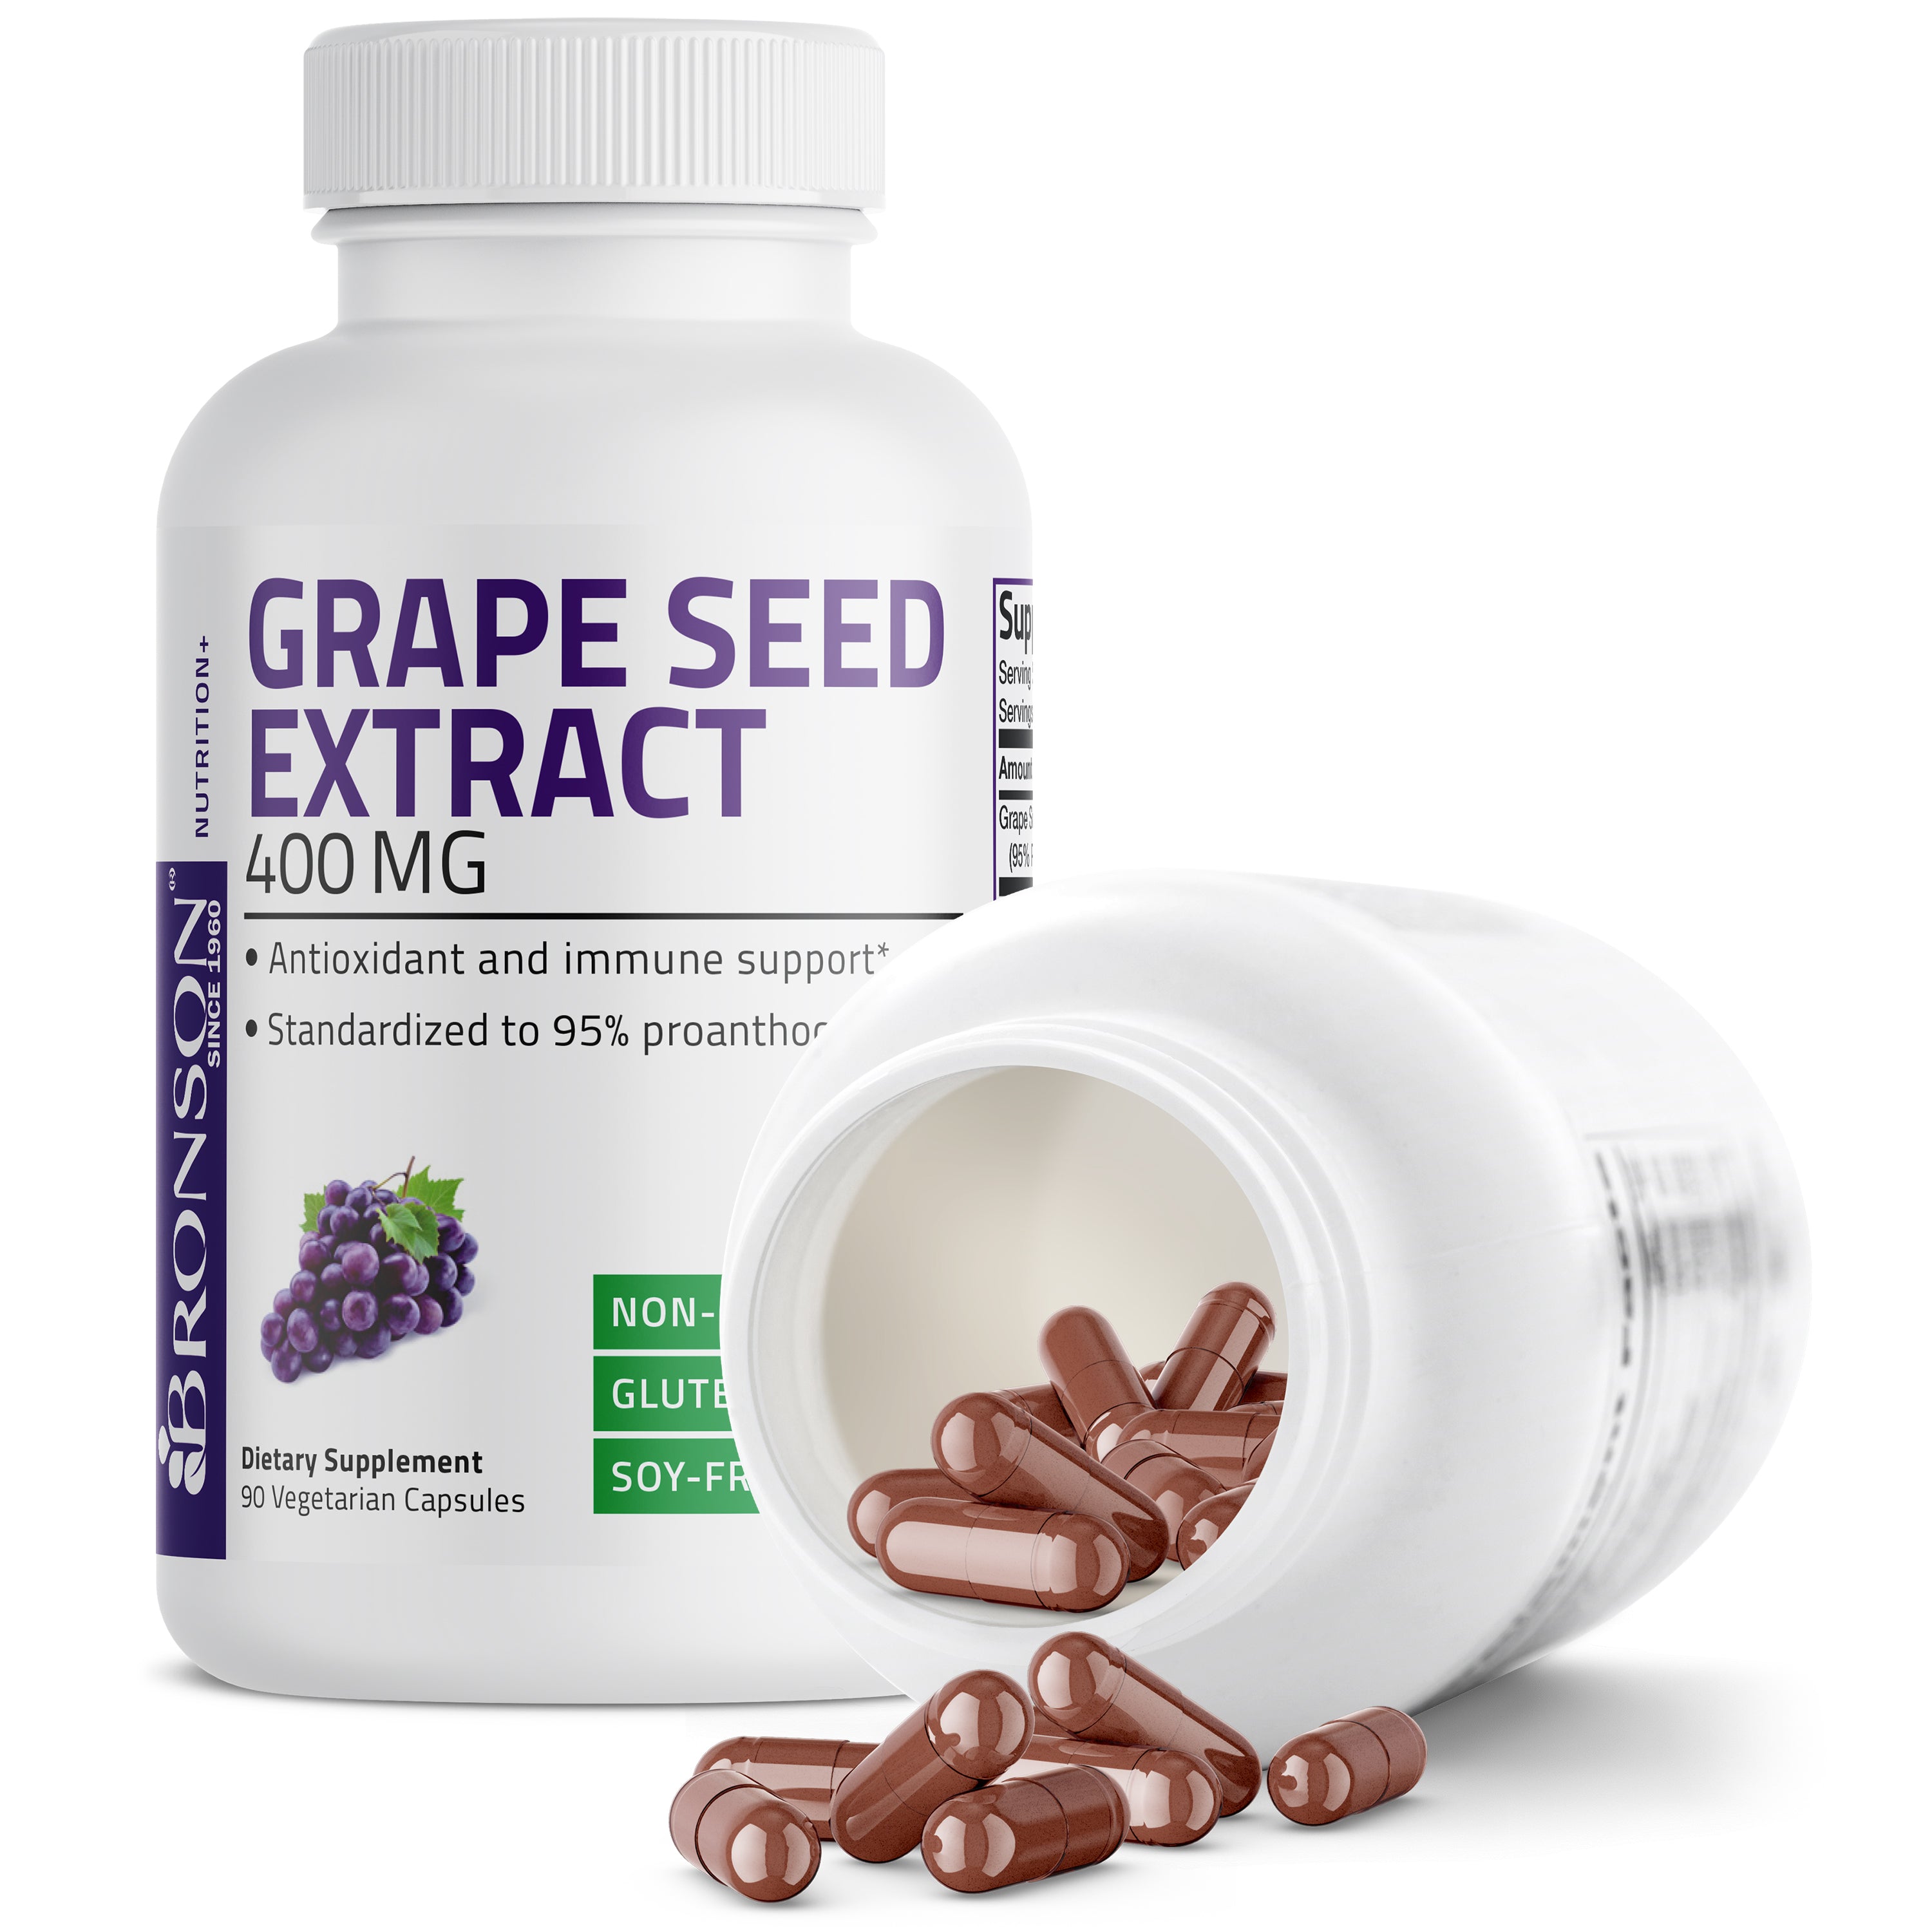 Grape Seed Extract Non-GMO - 400 mg view 5 of 6